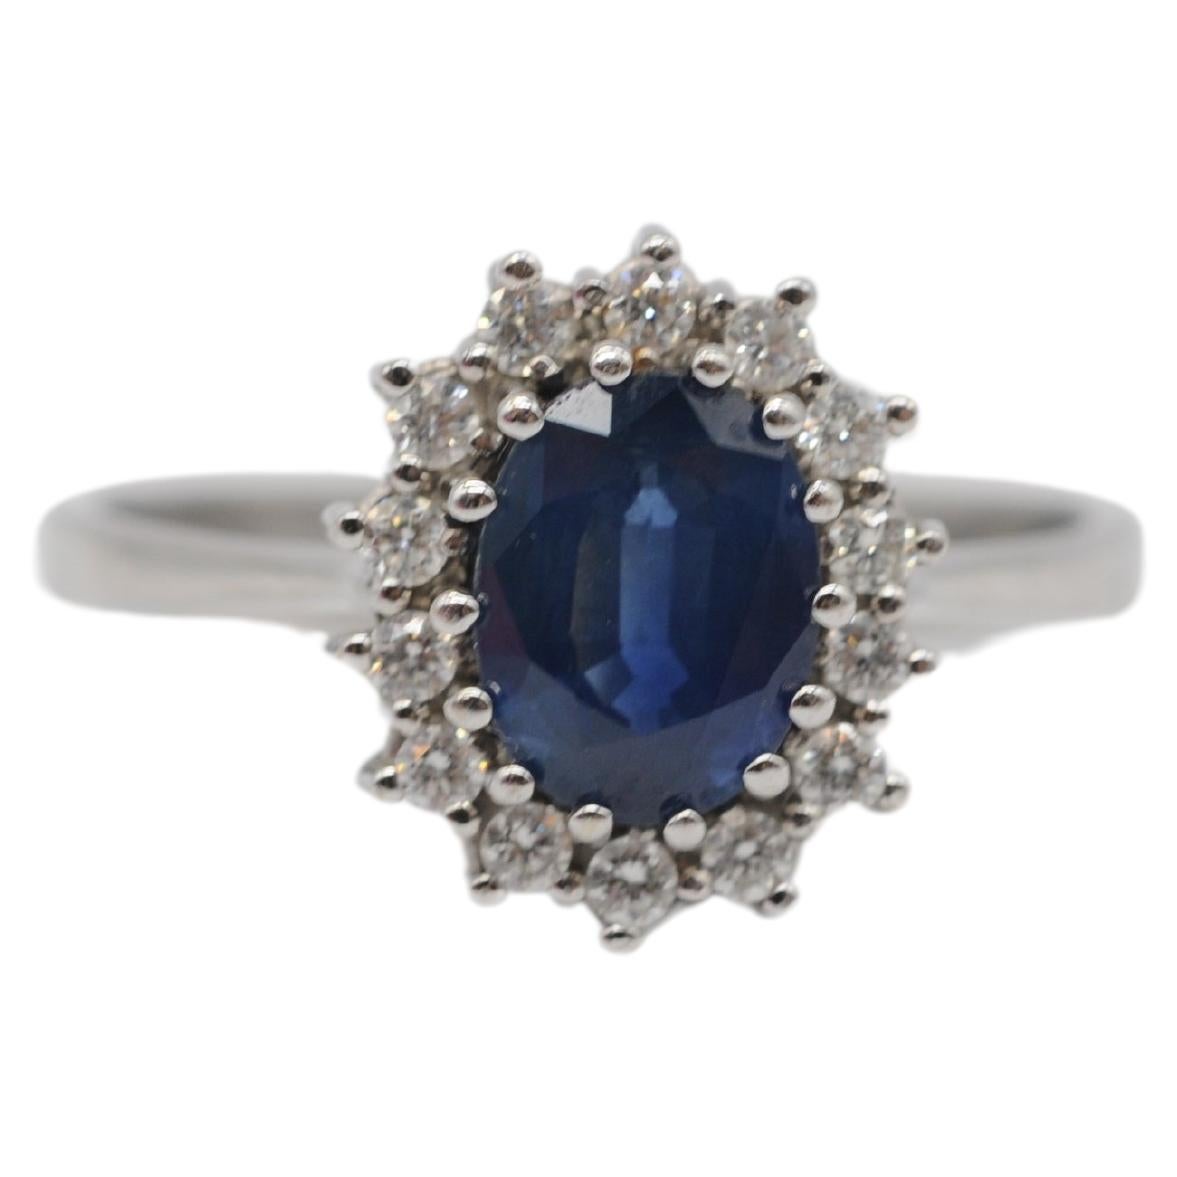 Exquisite gold ring with sapphire and diamonds, like Lady Diana's engagement For Sale